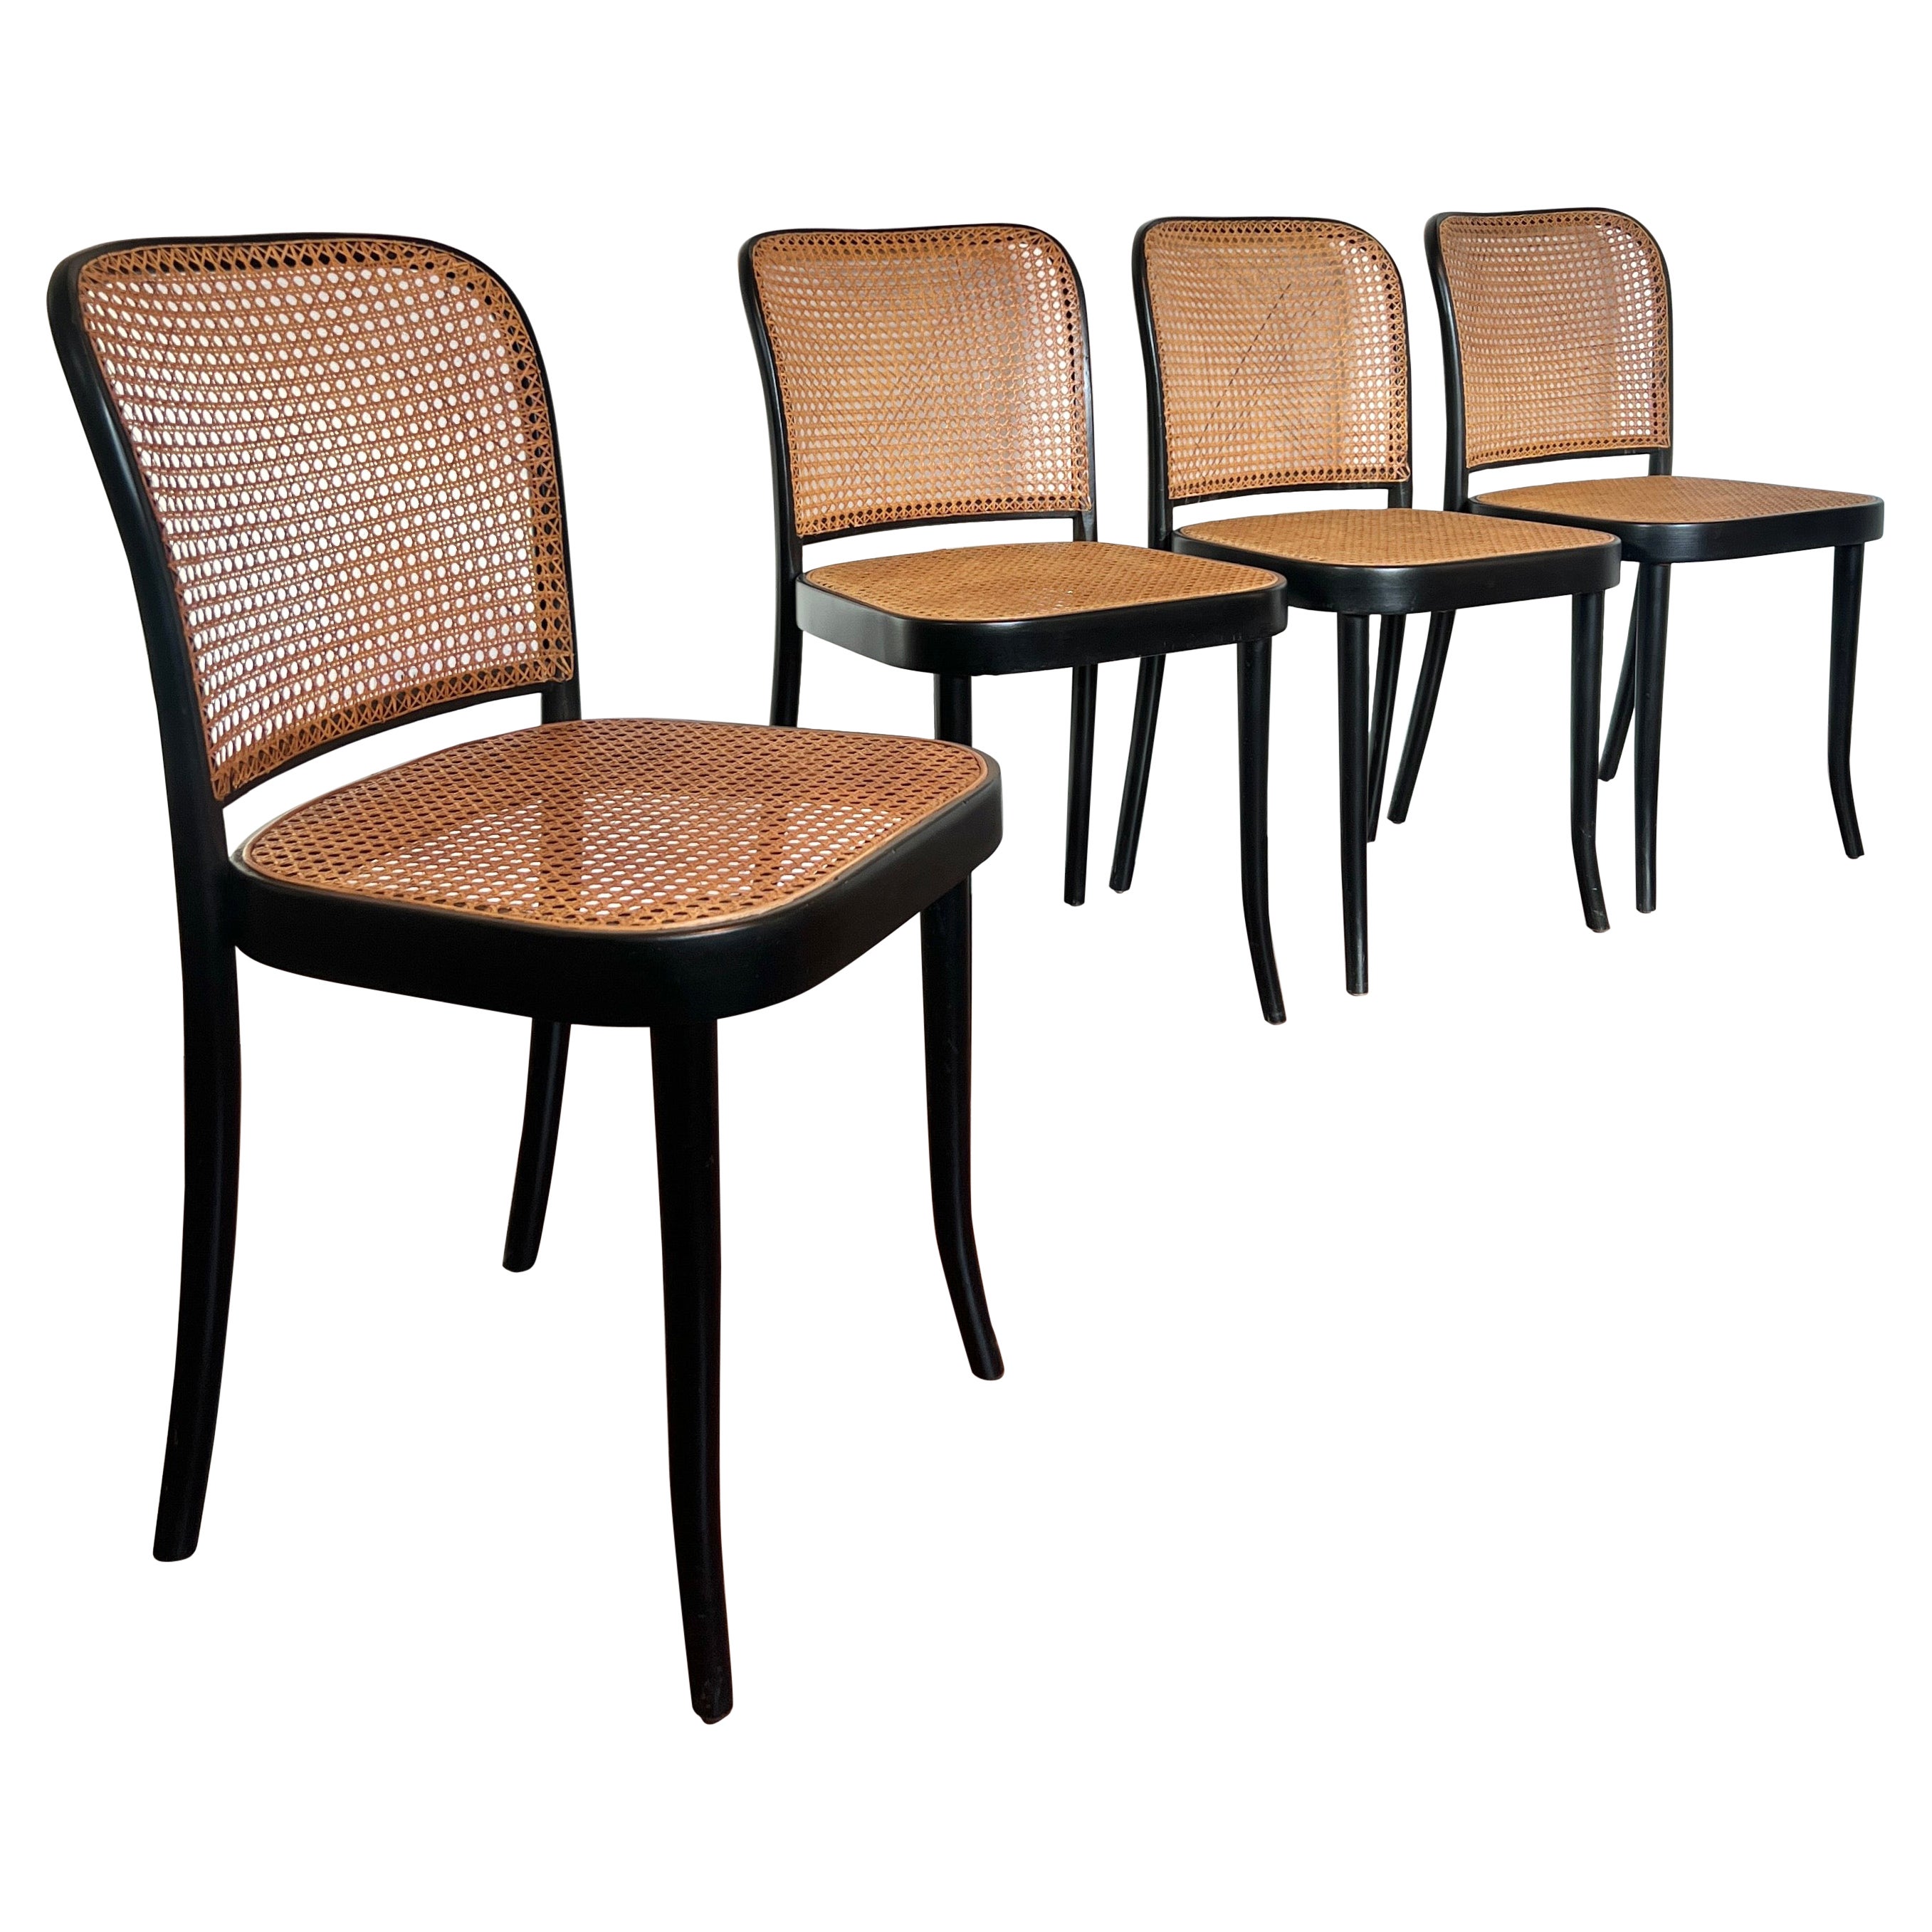 A set of of 4 original chairs by Josef Hoffmann for Thonet, circa 1960s